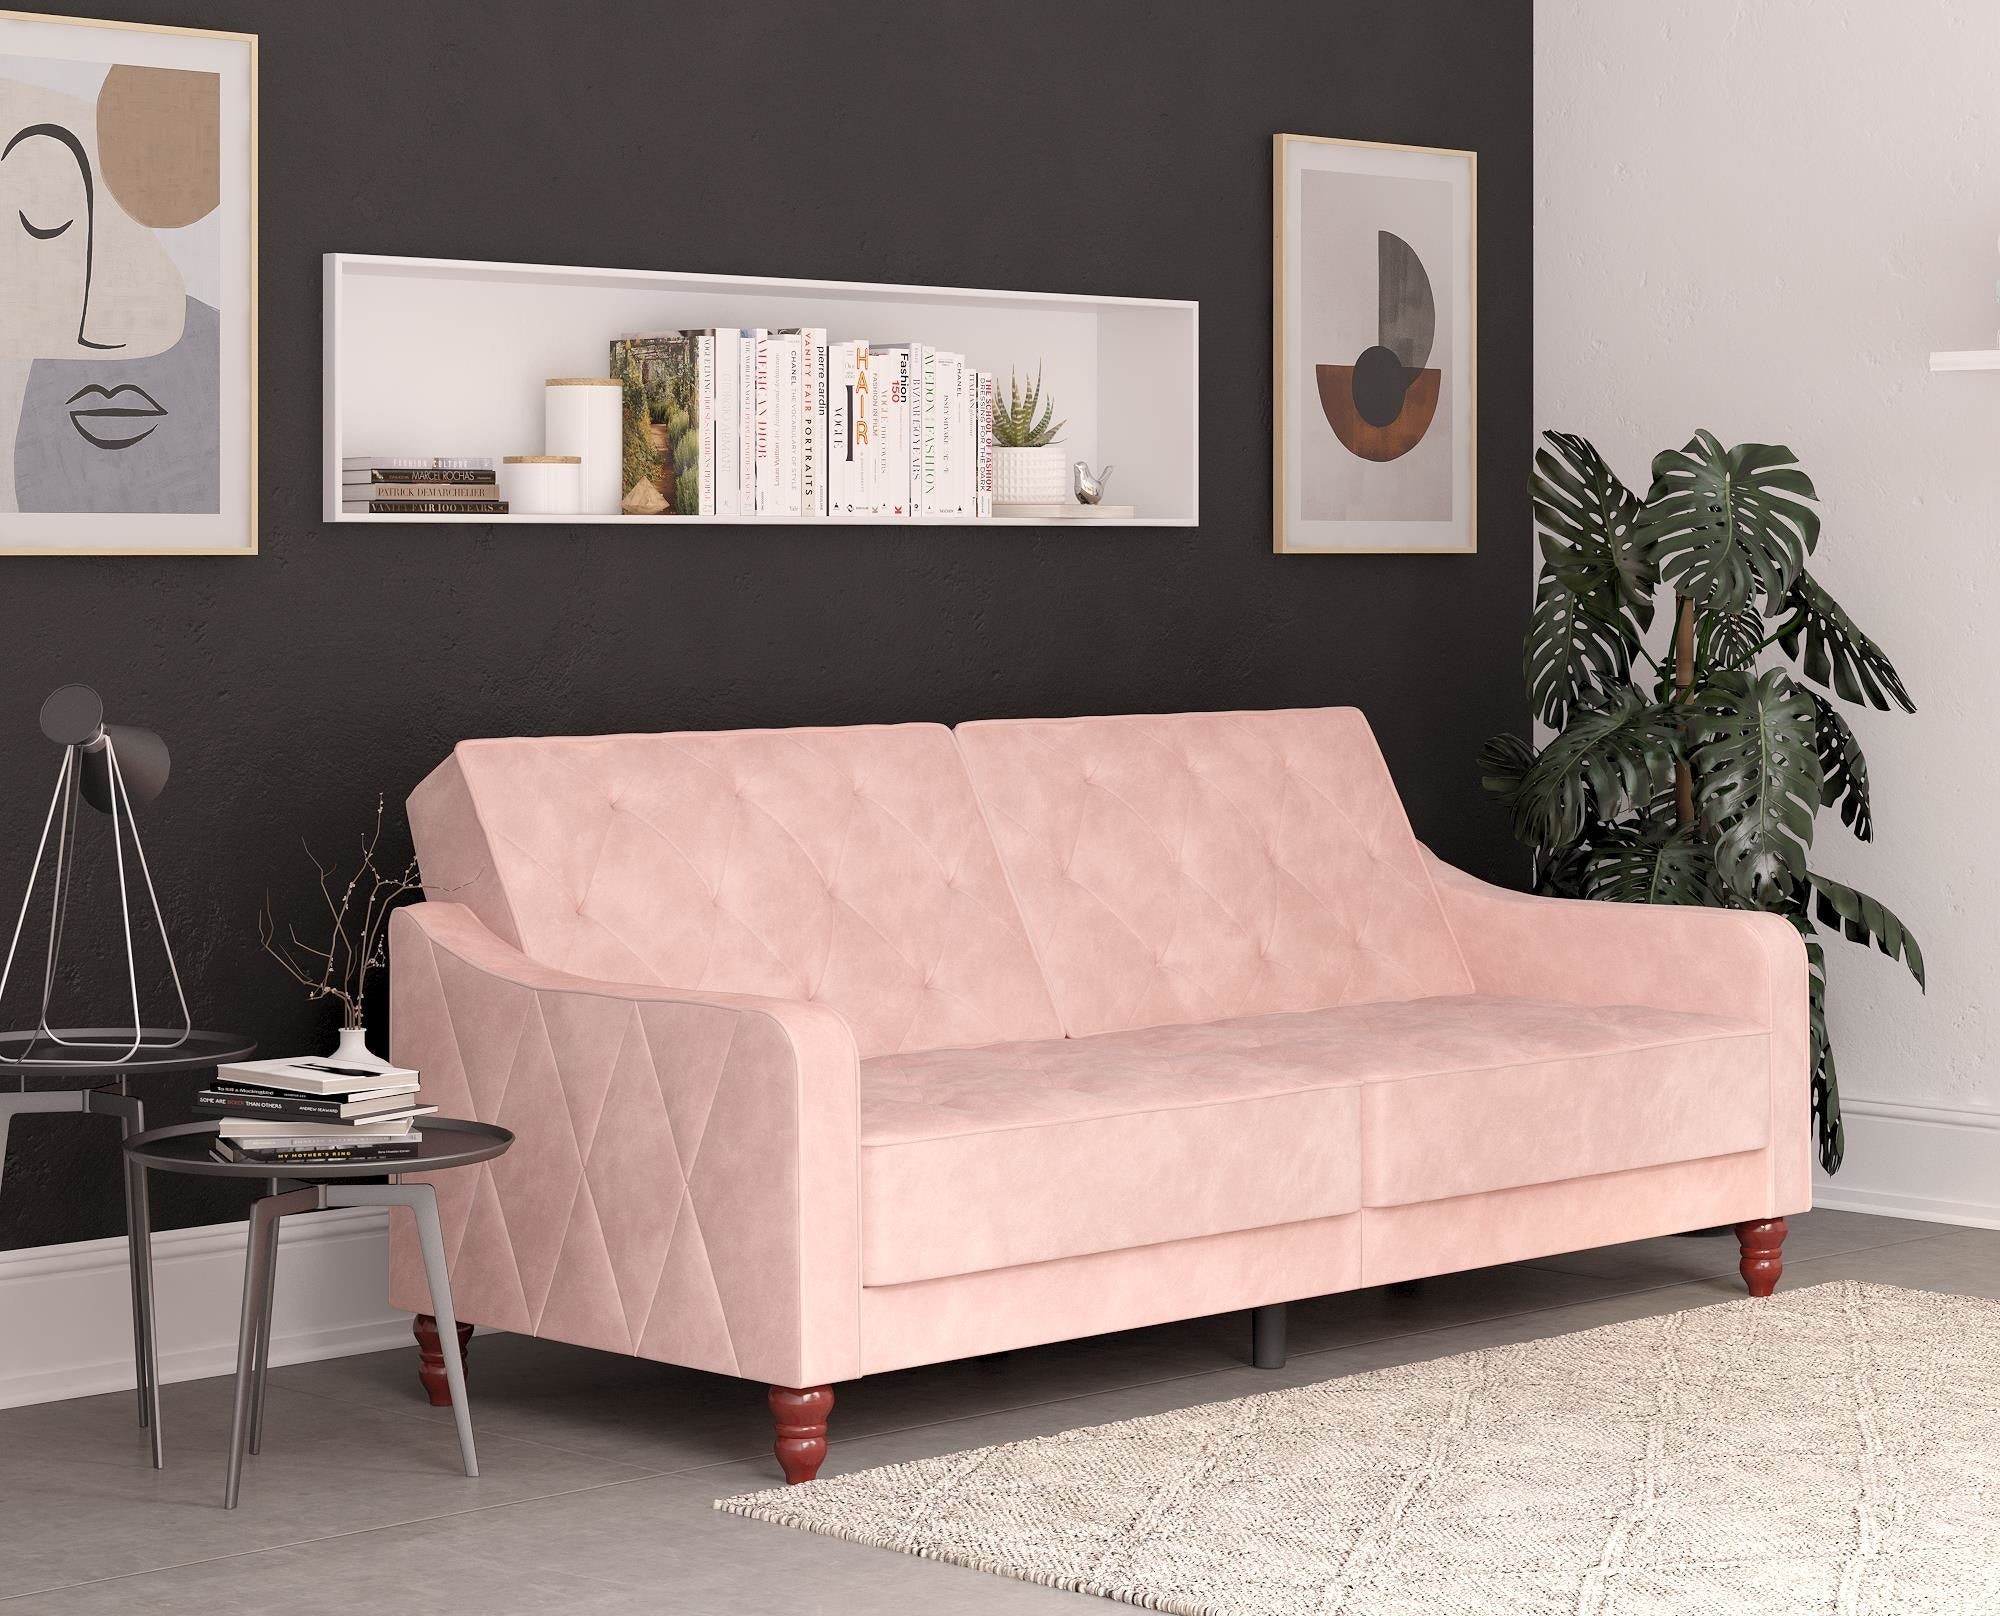 Pink velvet tufted couch with wooden legs